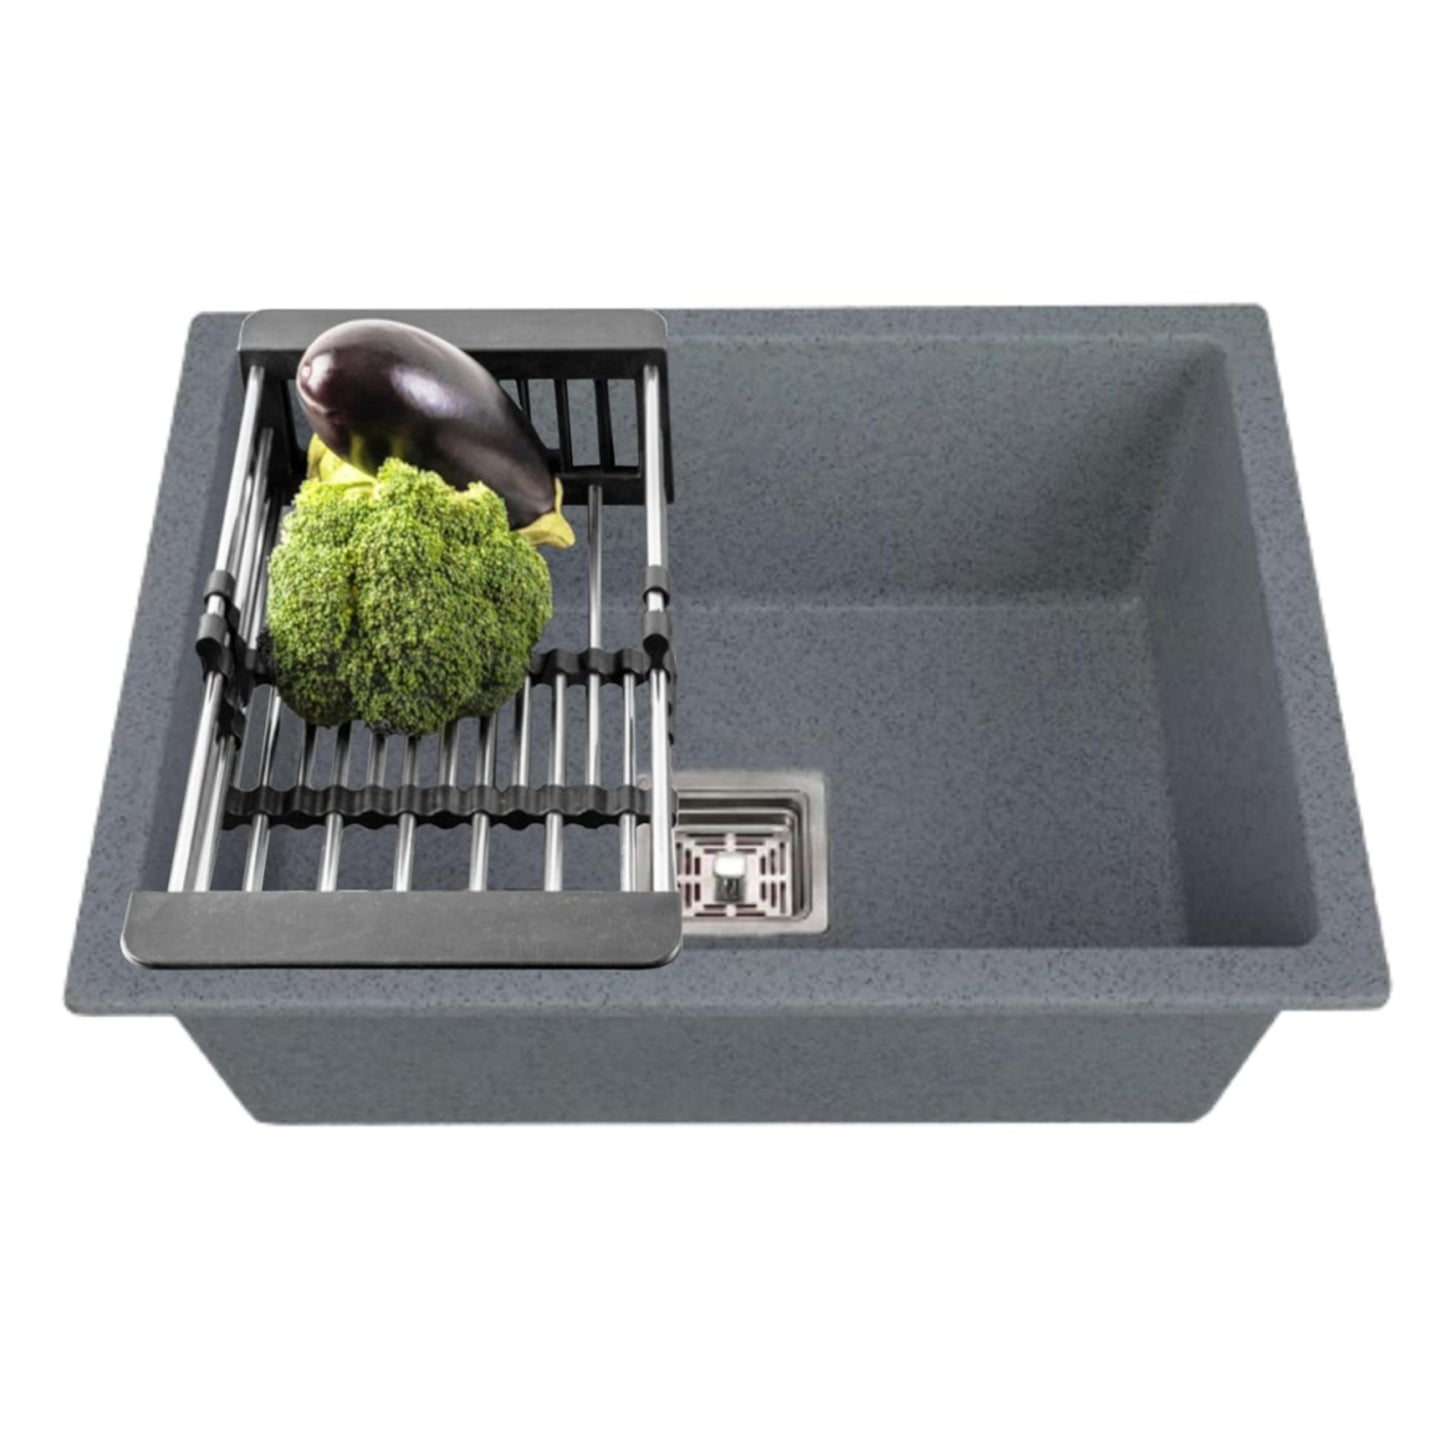 Fossa 18"x16"x09" inch Quartz Single Bowl Kitchen Sink | Non-fading Colour with UV Protection | Natural Stone Quartz/Granite Sink with Sink Coupling, Waste Pipe & Strainer Basket Smoke Grey